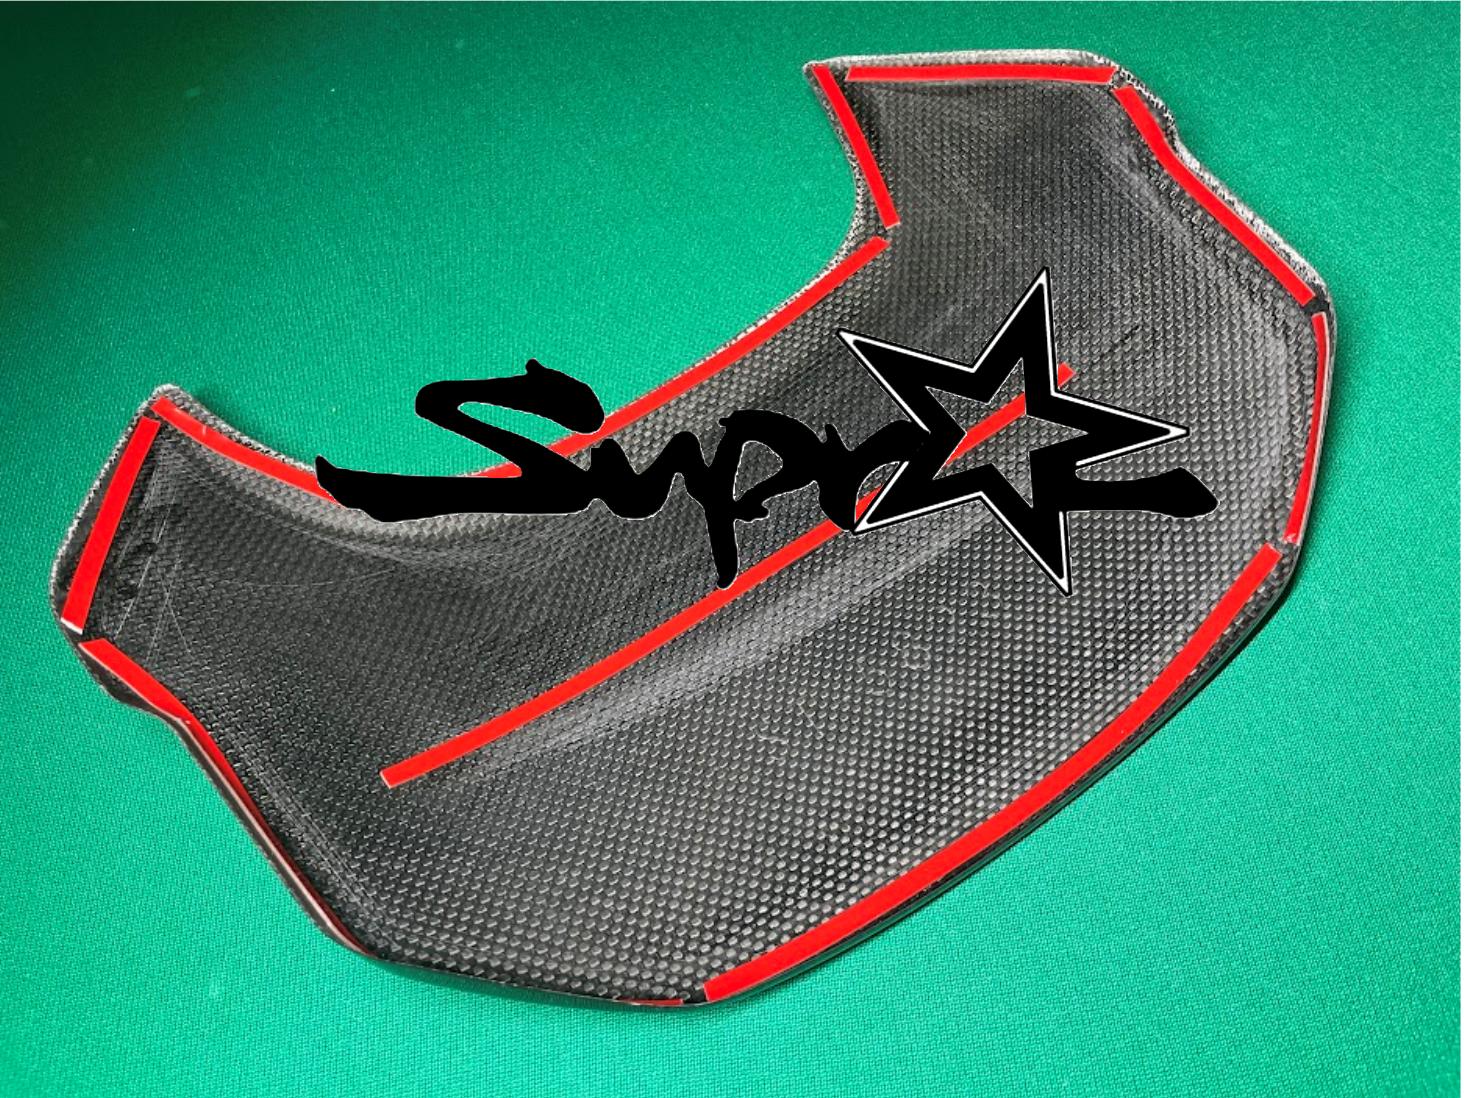 2020 up Toyota GR  Supra A90 Carbon crown meter cover